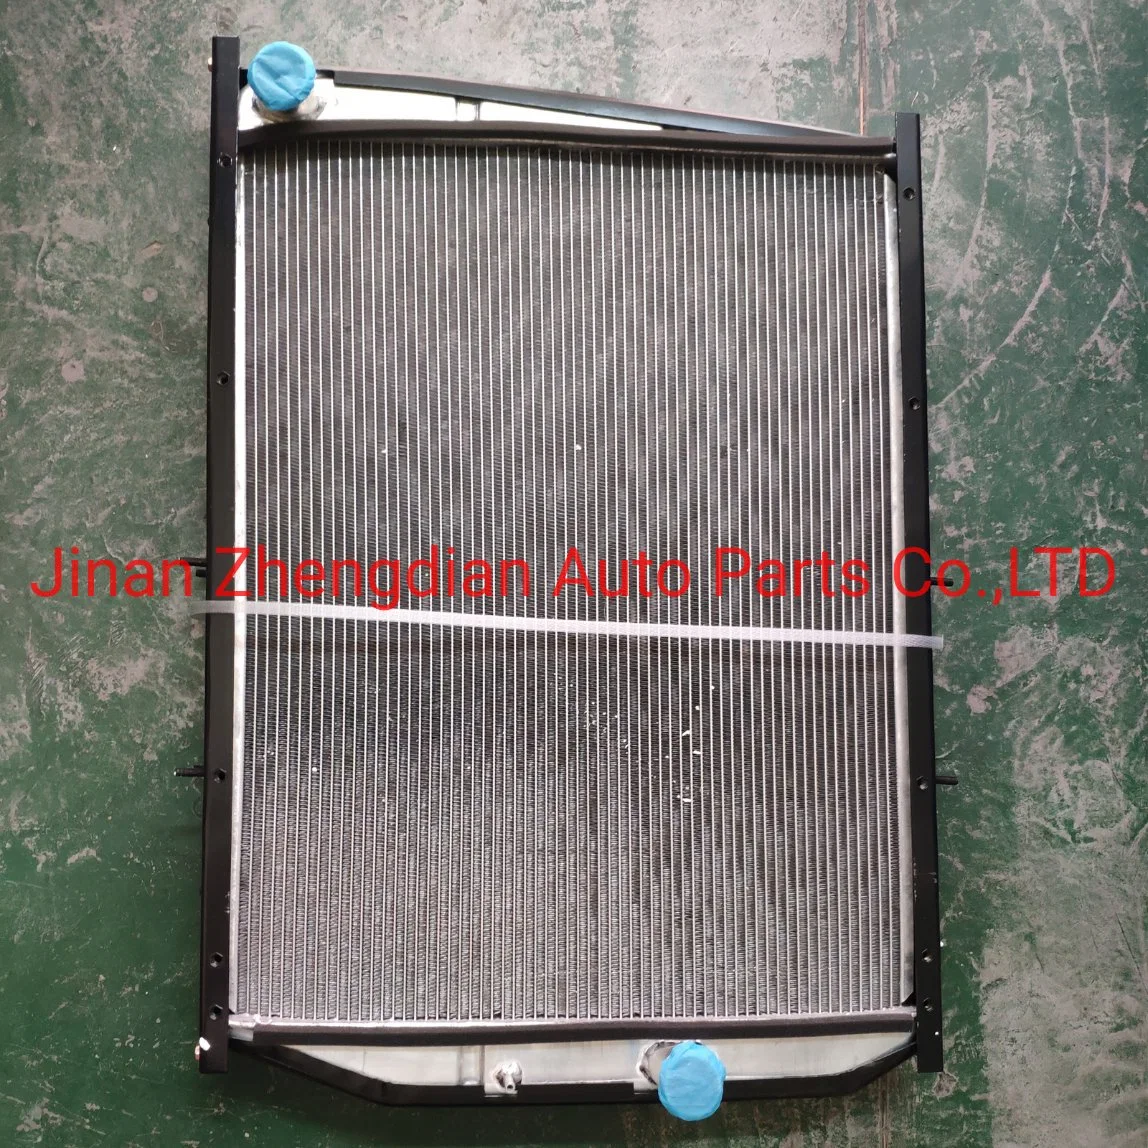 5065000801 Auto Radiator for Beiben Truck Spare Parts Sinotruk HOWO Sitrak Shacman FAW Foton Auman Camc Dongfeng Camc Cooling Spare Parts